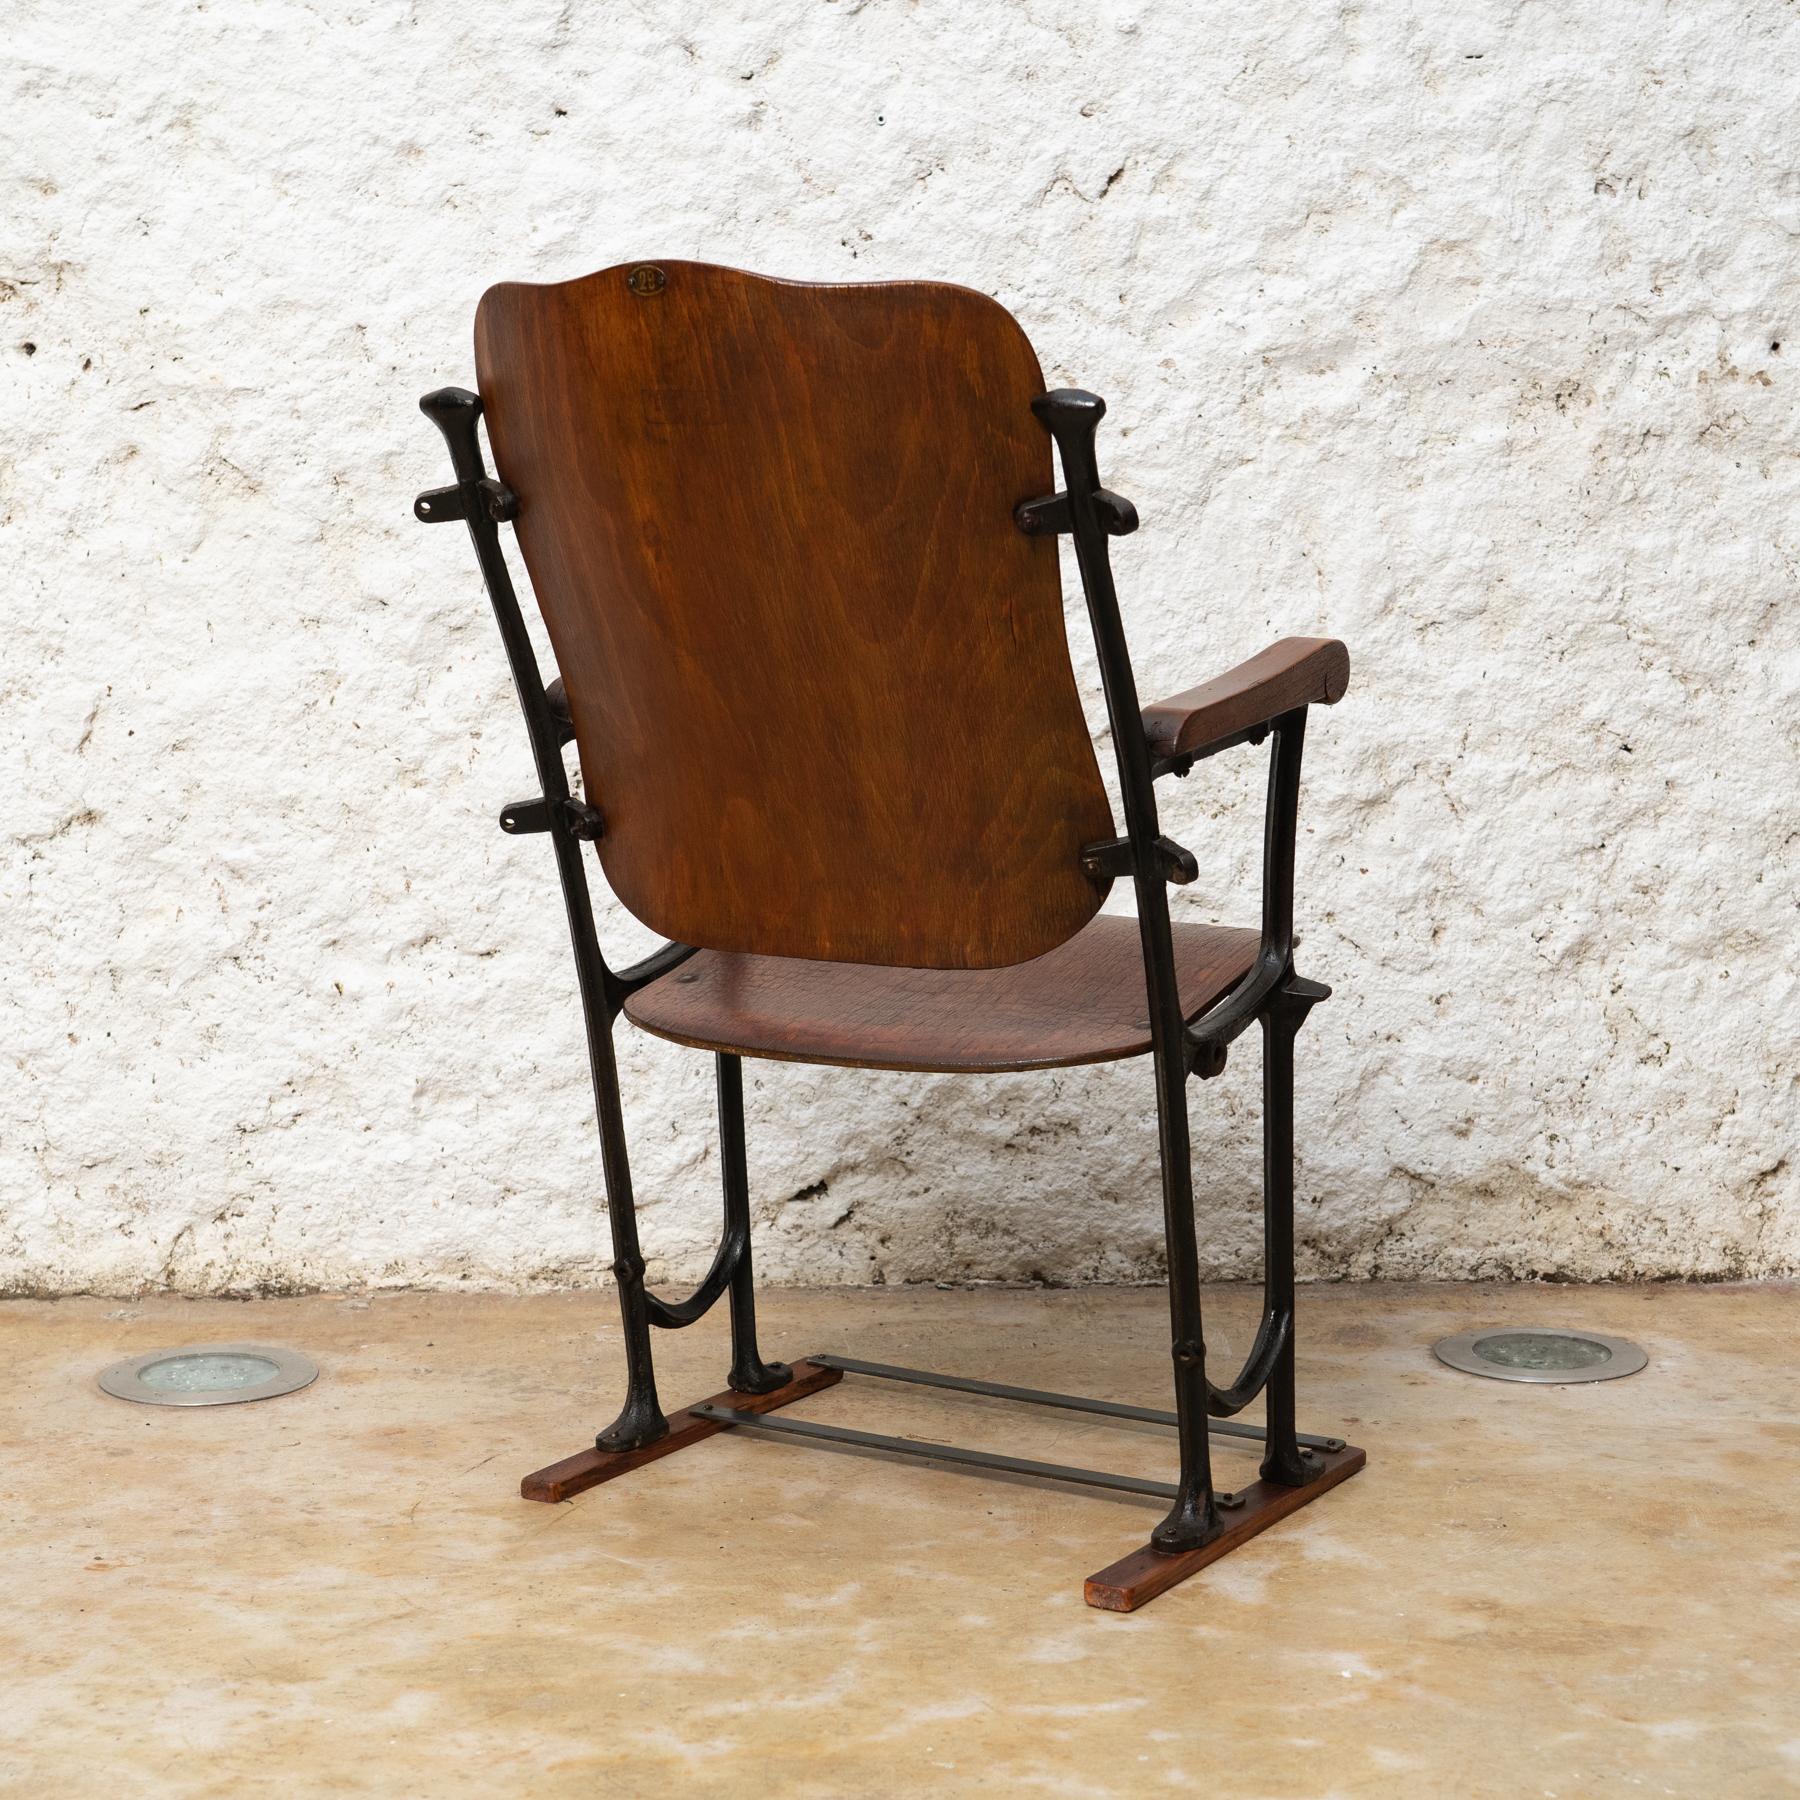 Spanish Elegance in Time: Catalan Modernism Theater Chair 'Kursaal', c. 1930 For Sale